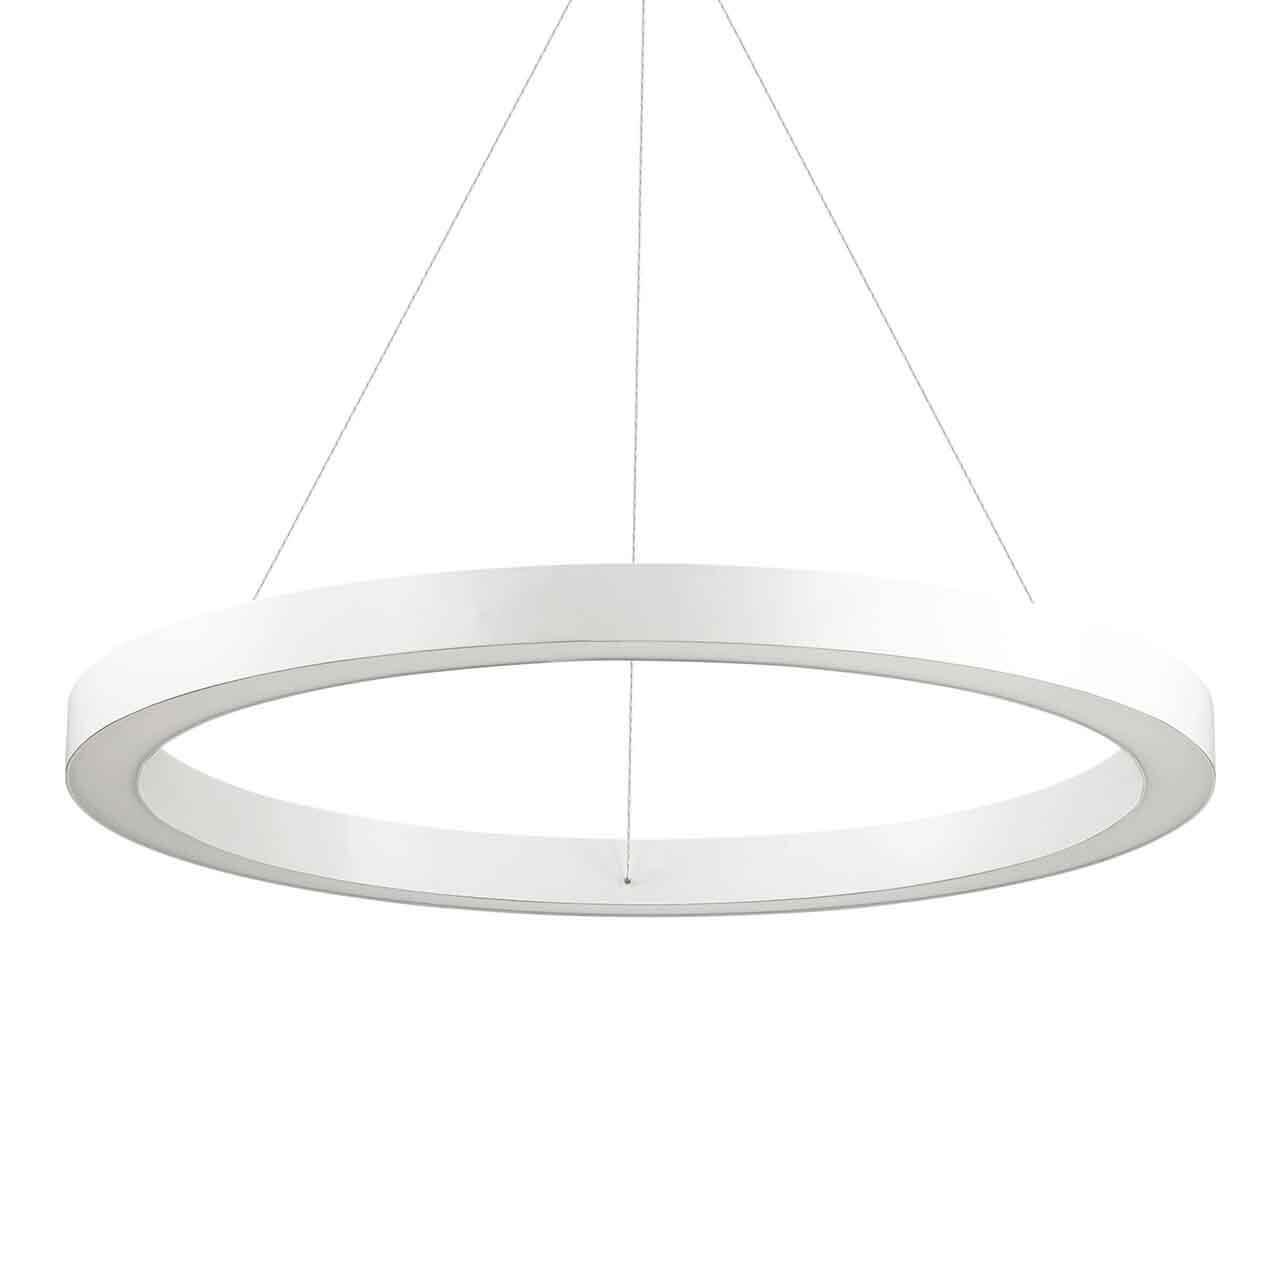    Ideal Lux Oracle D70 Round Bianco 211381